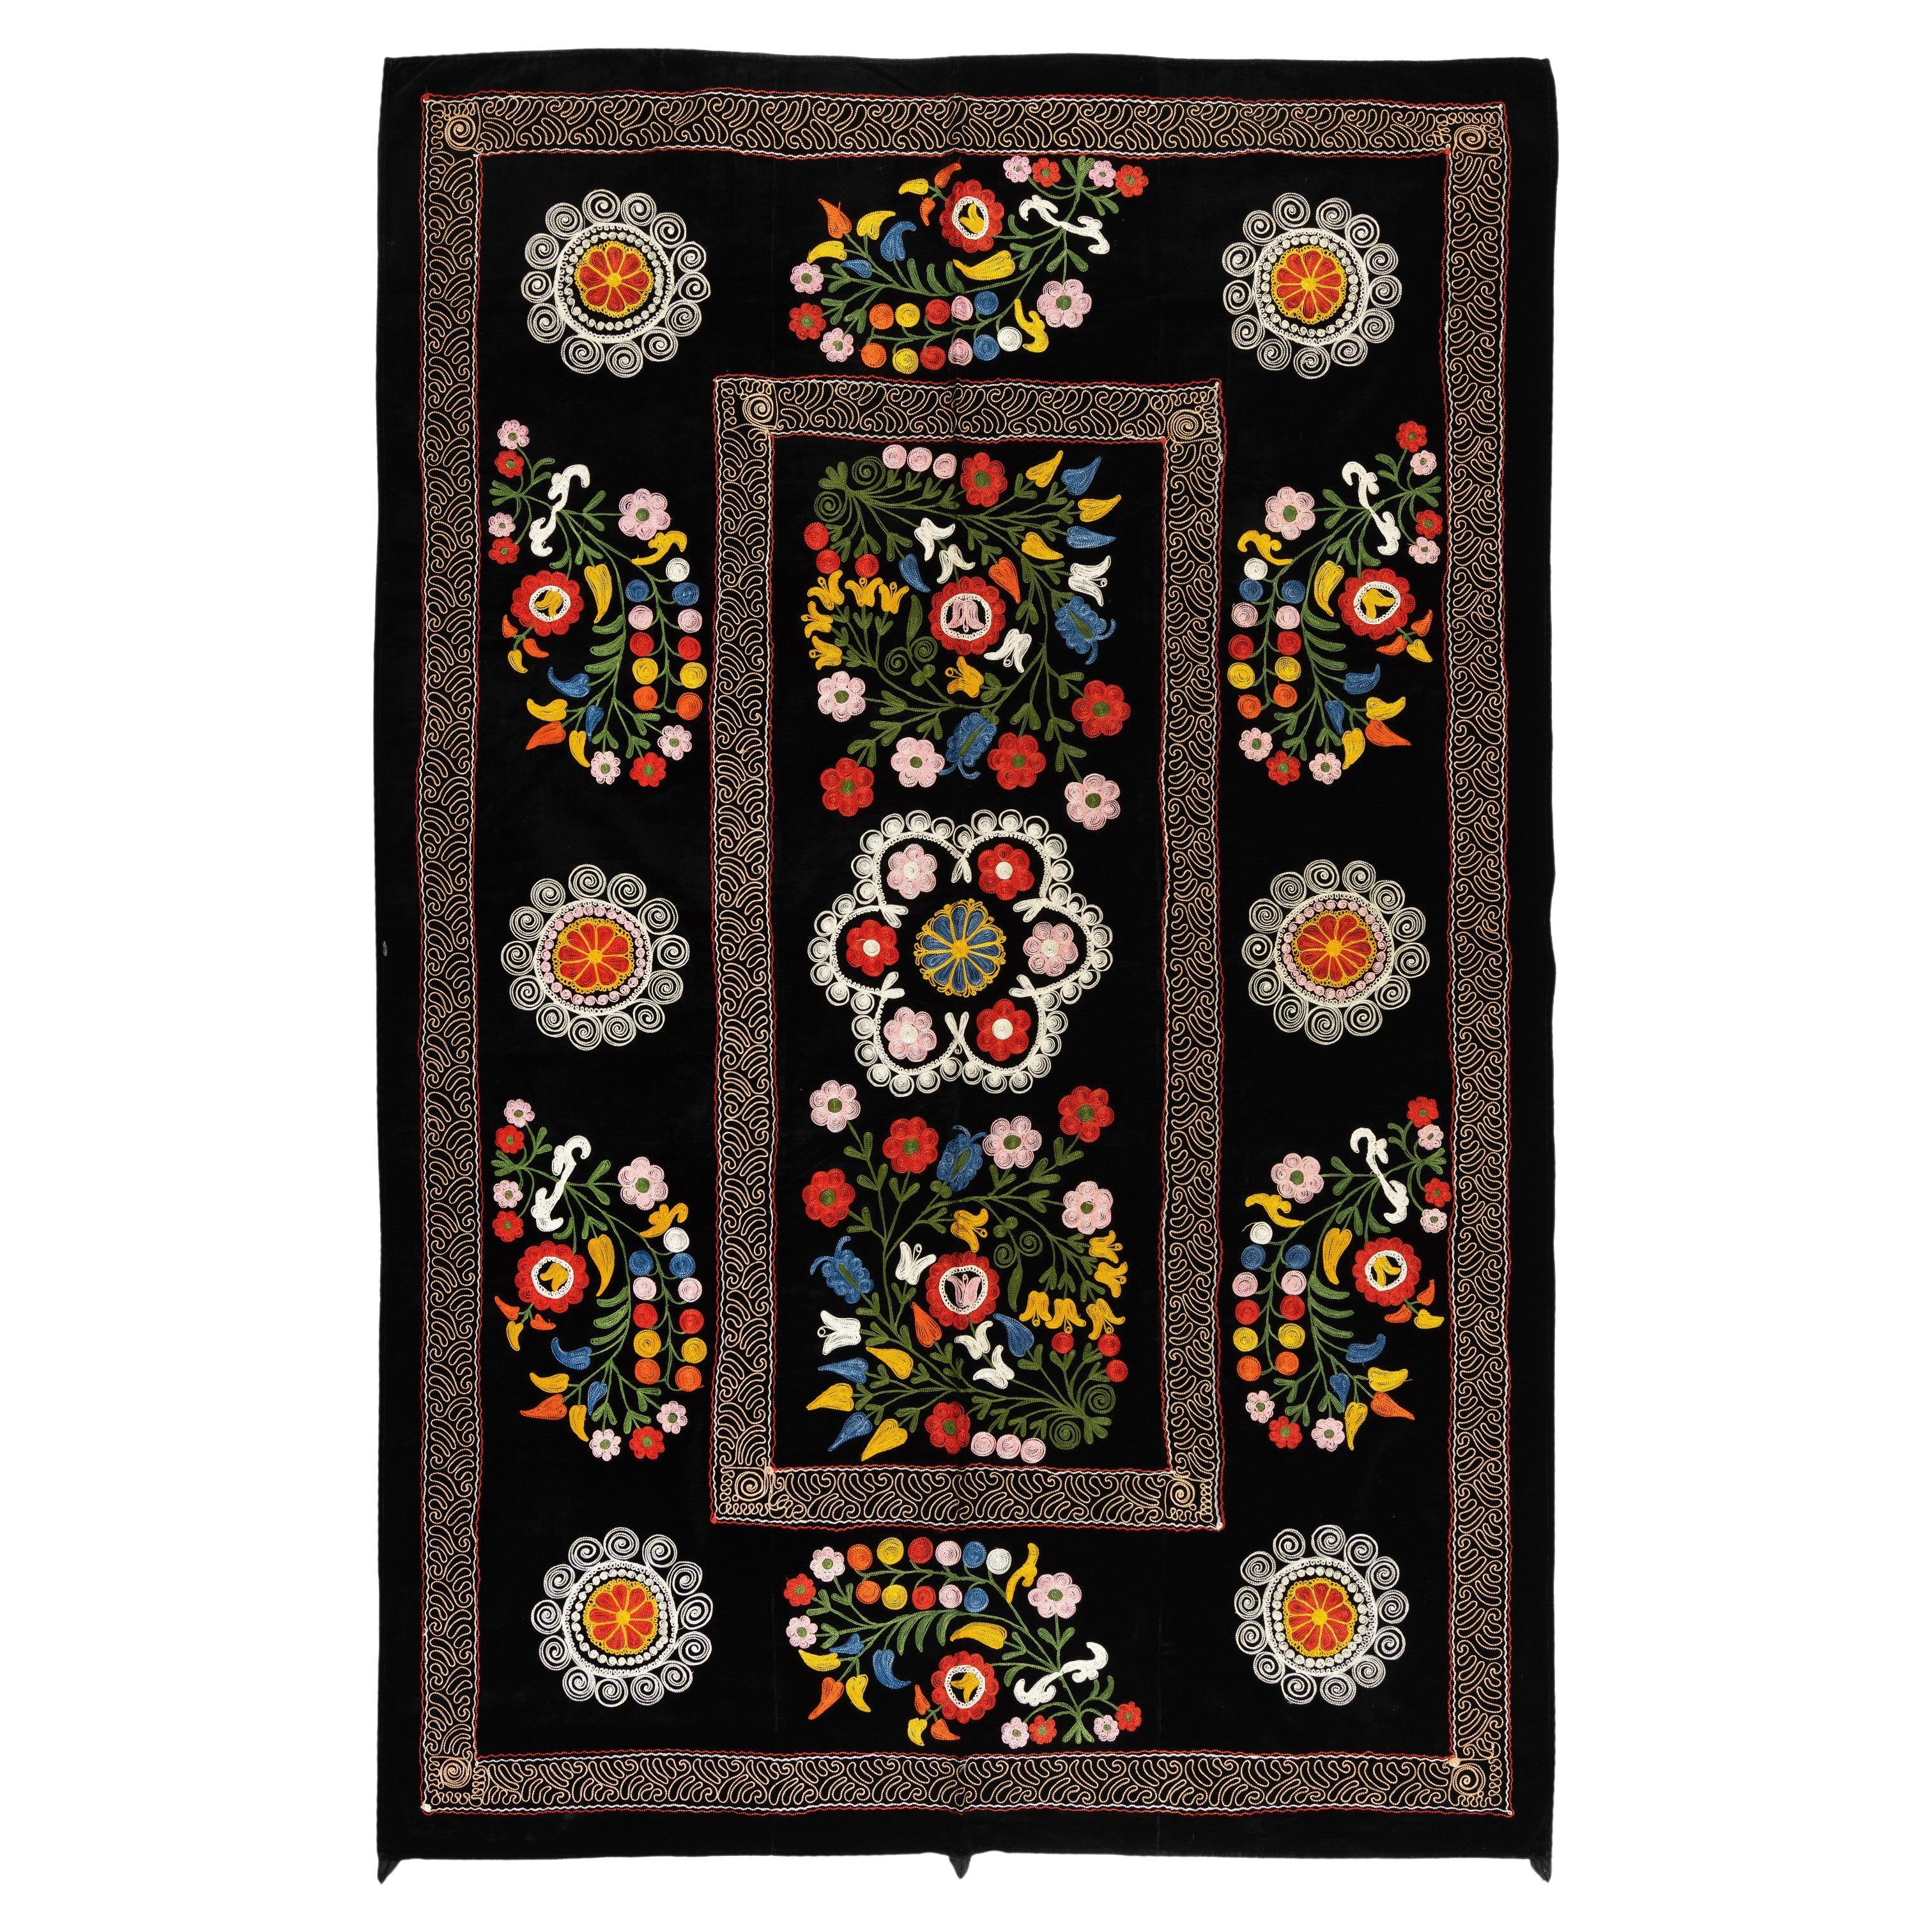 4.4x6.7 Ft Silk Embroidered Suzani Bed Cover, Floral Pattern Black Wall Hanging